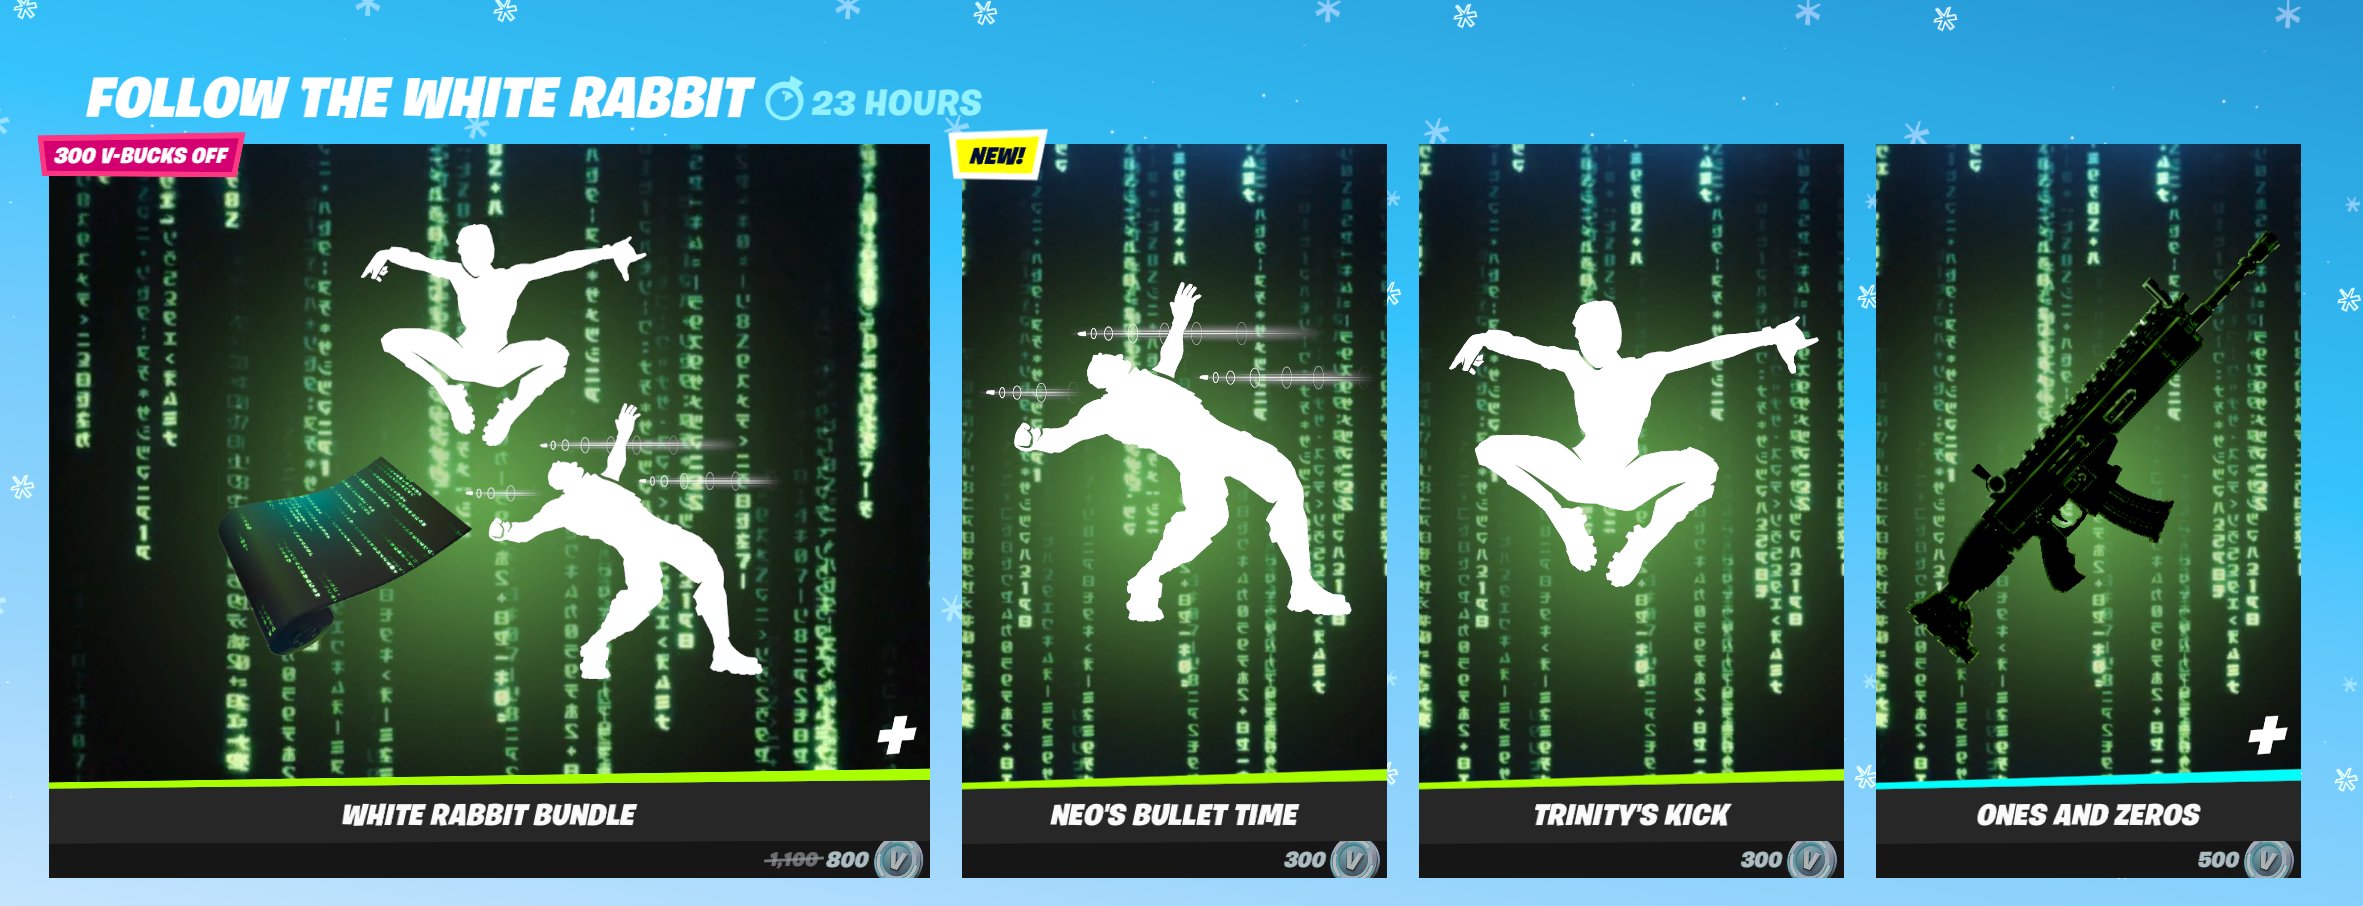 Emotes and a wrap from The Matrix came to Fortnite  